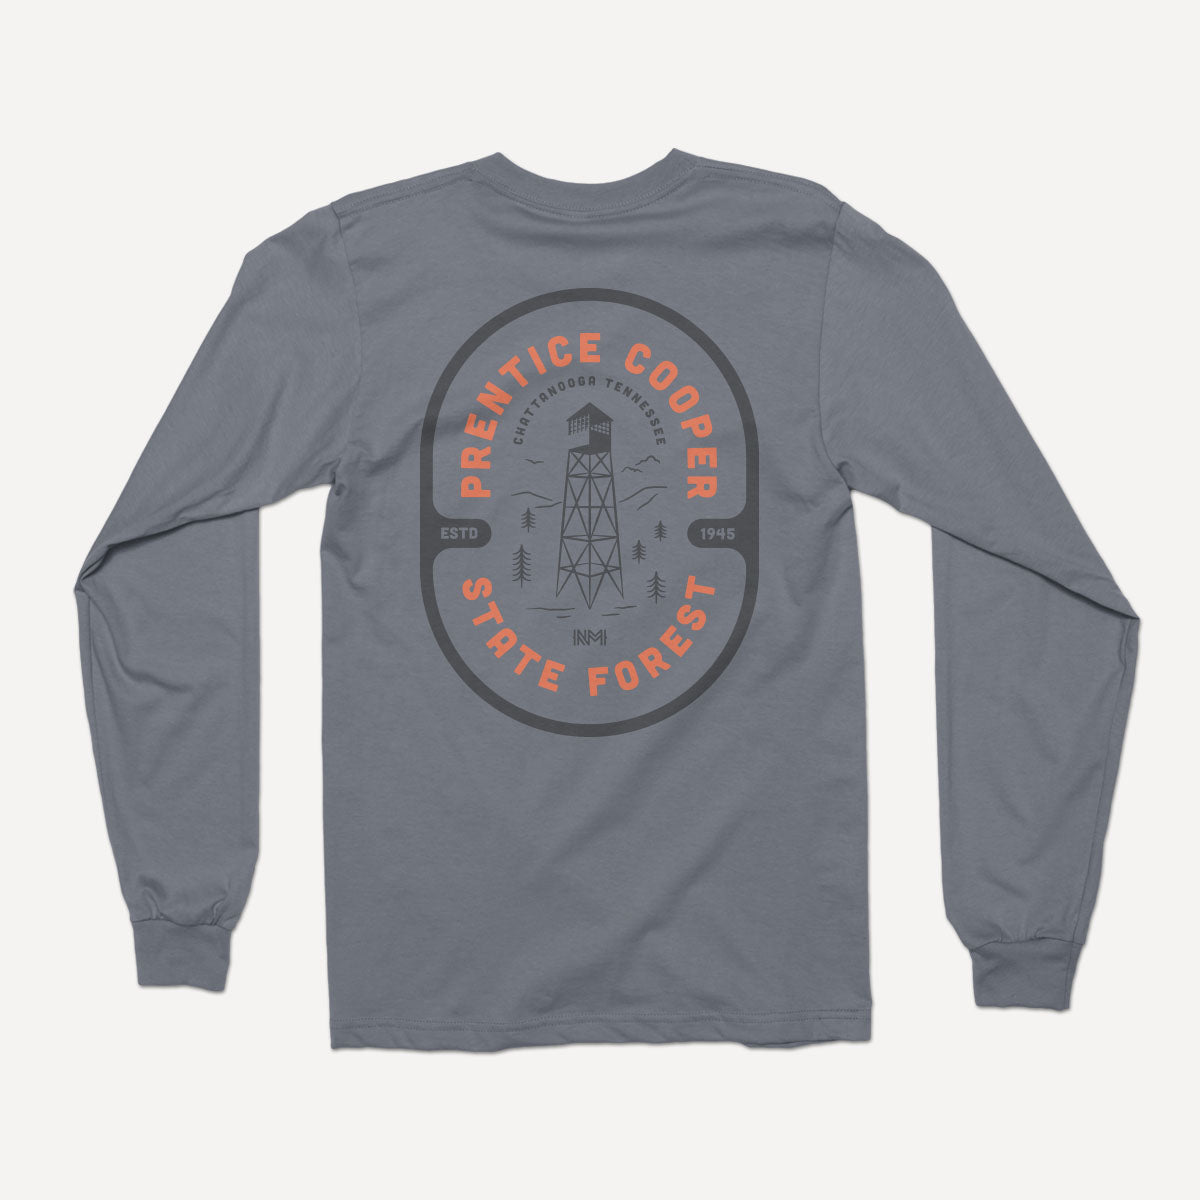 back of the Prentice Cooper State Forest long sleeve tee